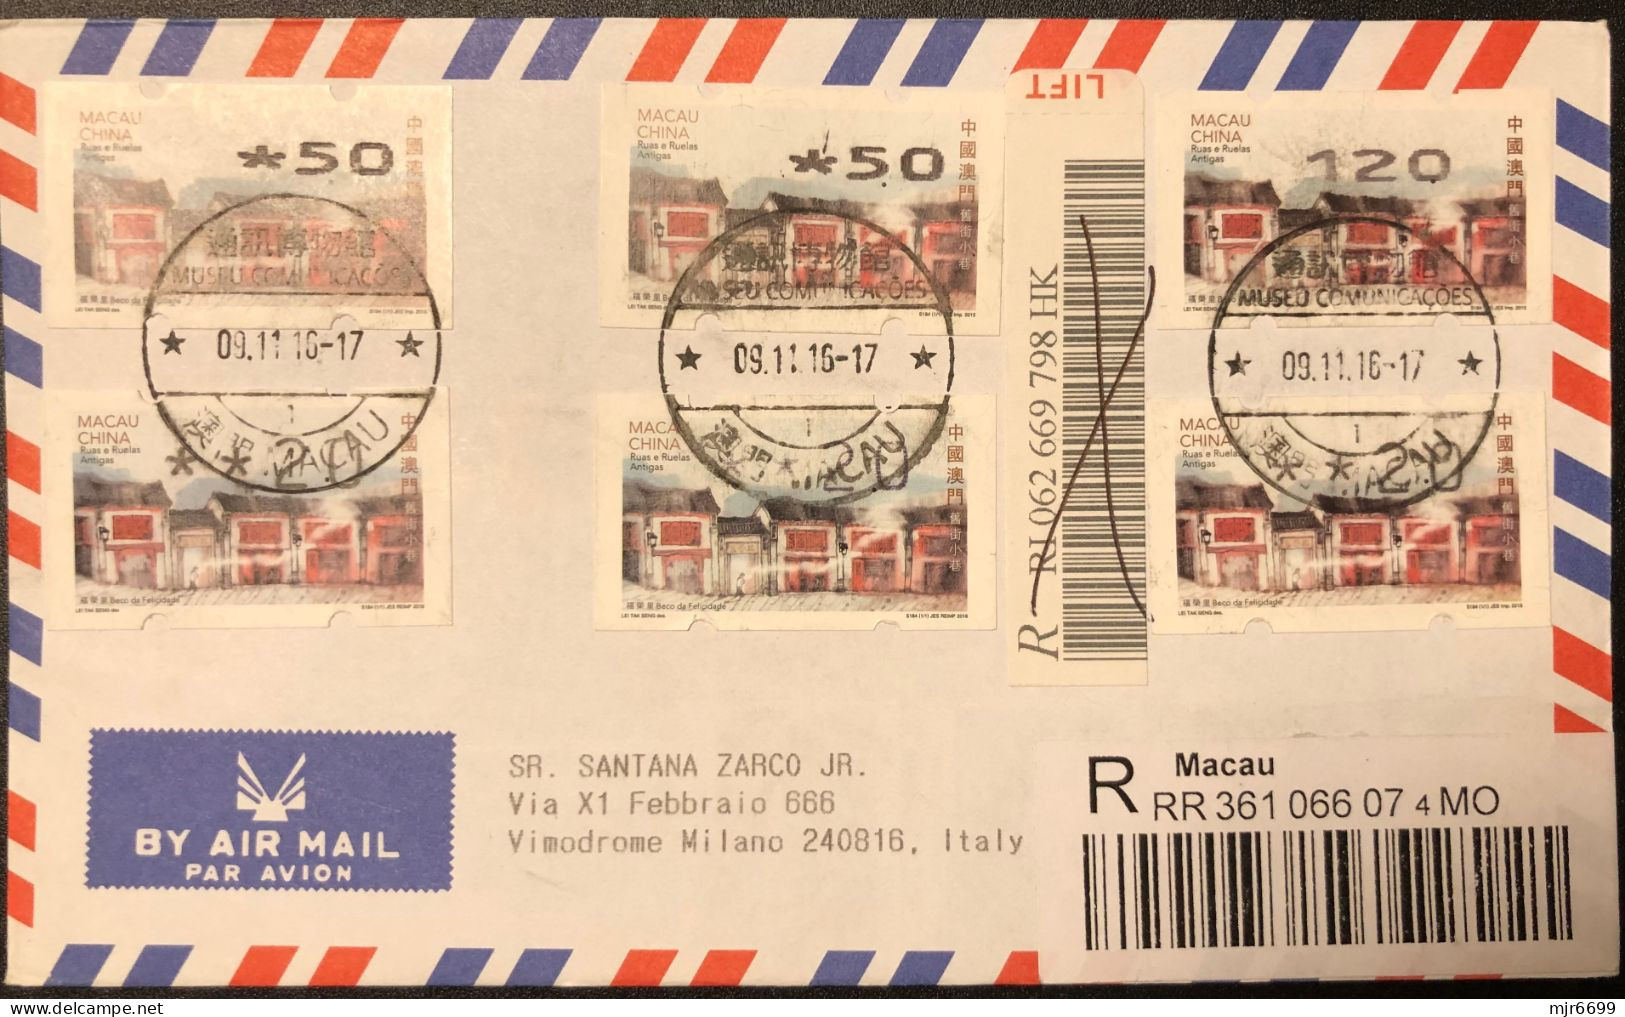 2016 MACAU ATM LABEL OLD STREETS ISSUE, REGISTERED COVER TO ITALY. 12P LABEL WITH PRINTING ERROR, Shift Left. - Distributeurs